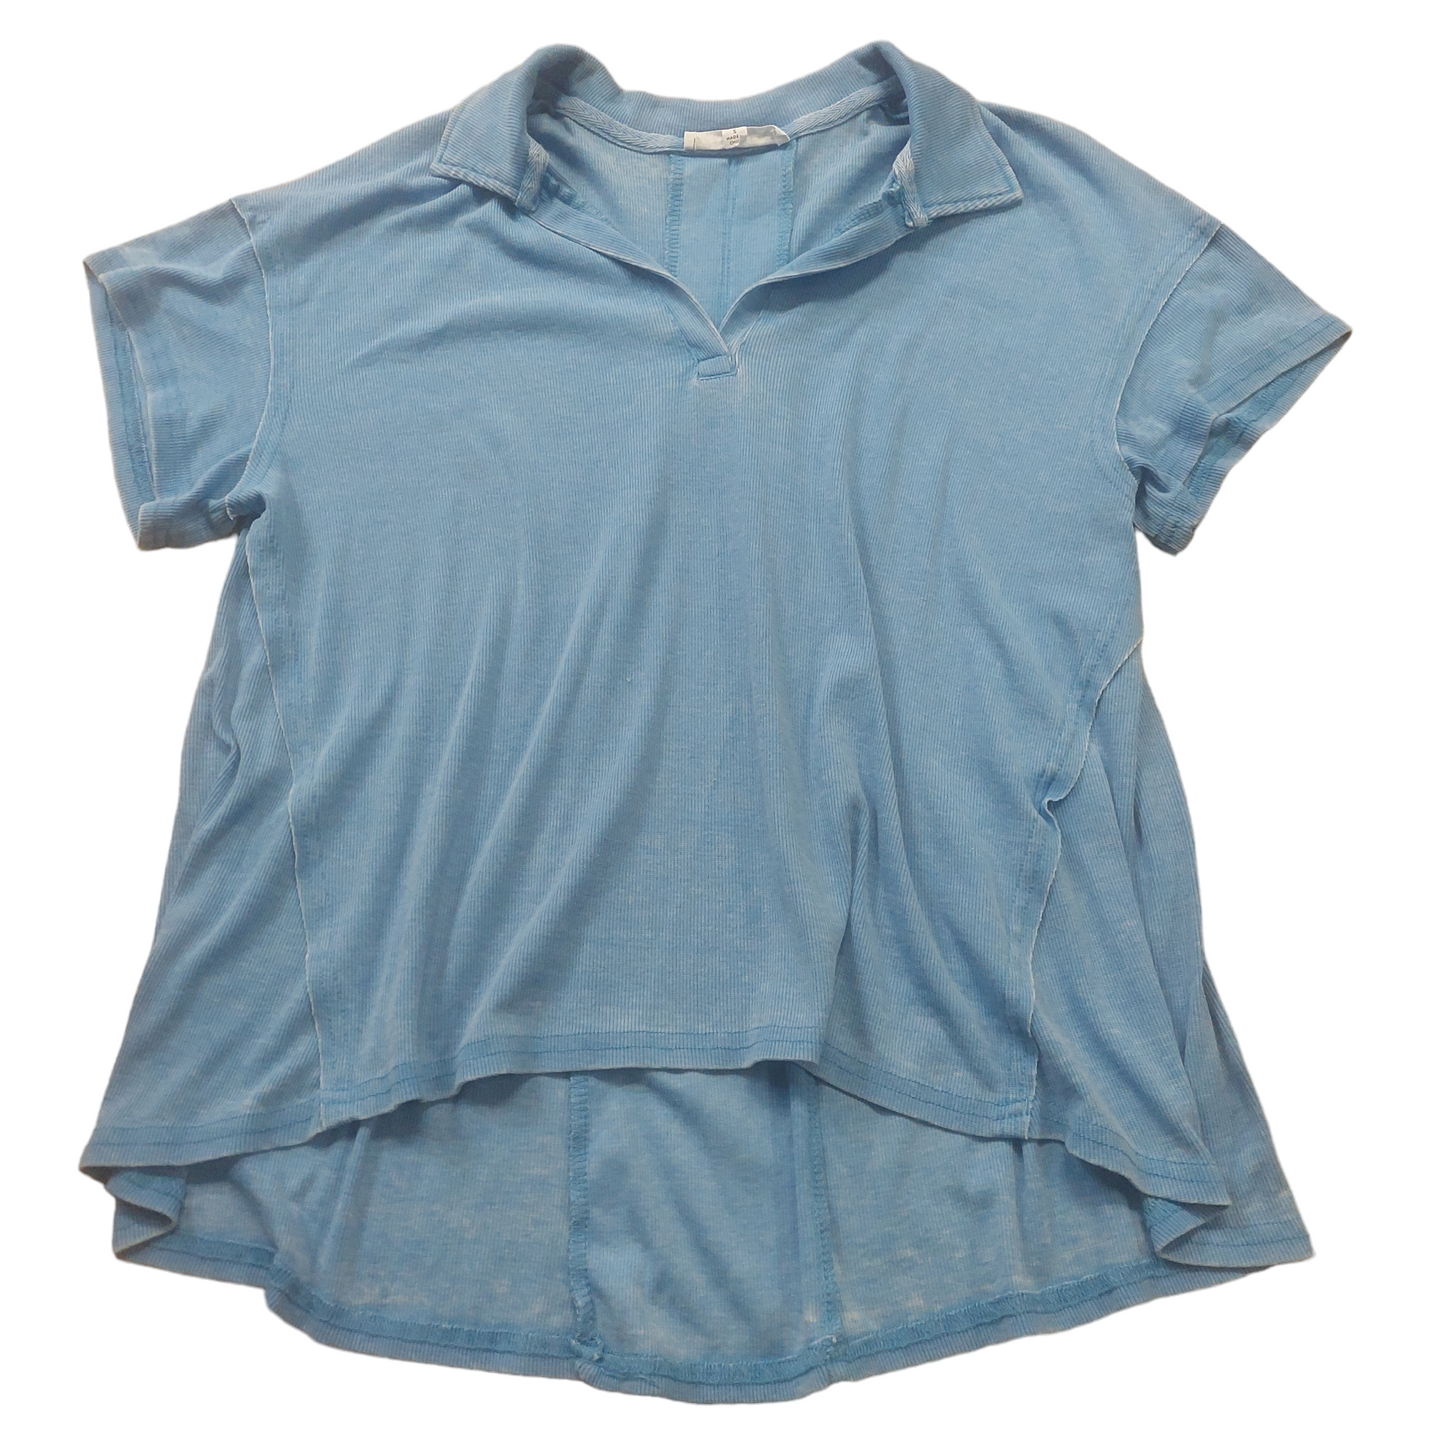 Blue Top Short Sleeve Jane And Delancey, Size S